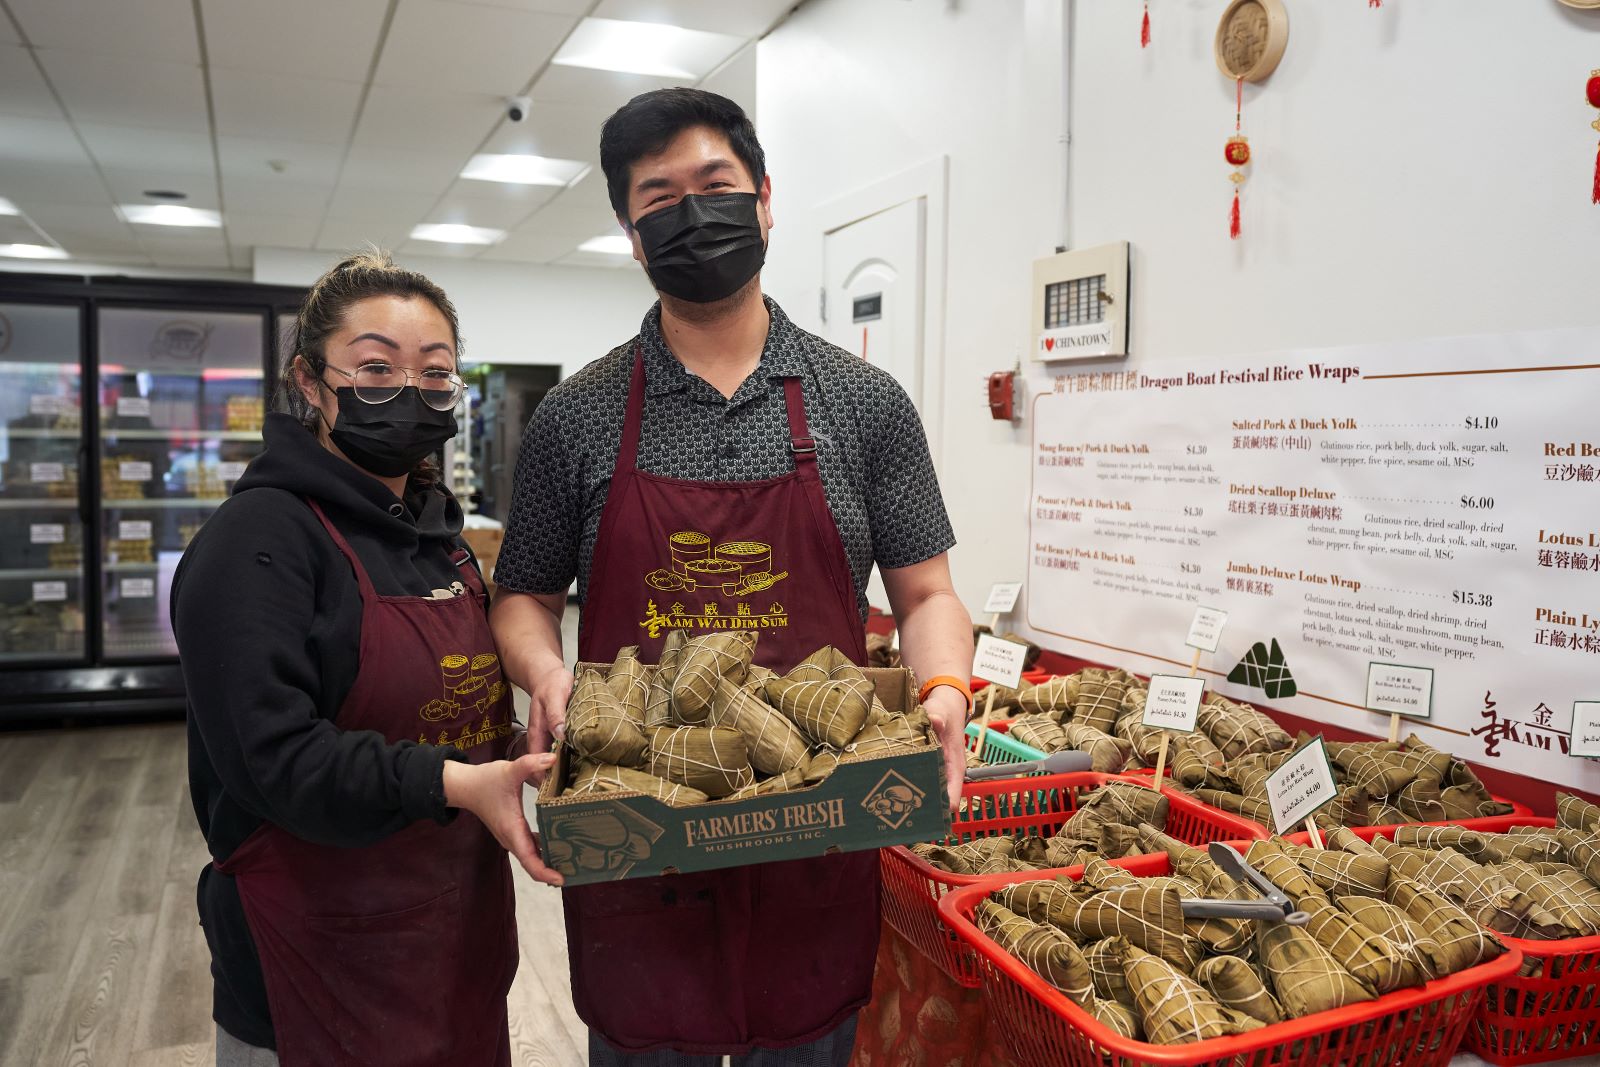 Susan (left) and William Liu (right) hold a box of zongzi at Kam Wai Dim Sum. They are wearing black medical masks and matching maroon apronx. They are looking at the camera and smiling.